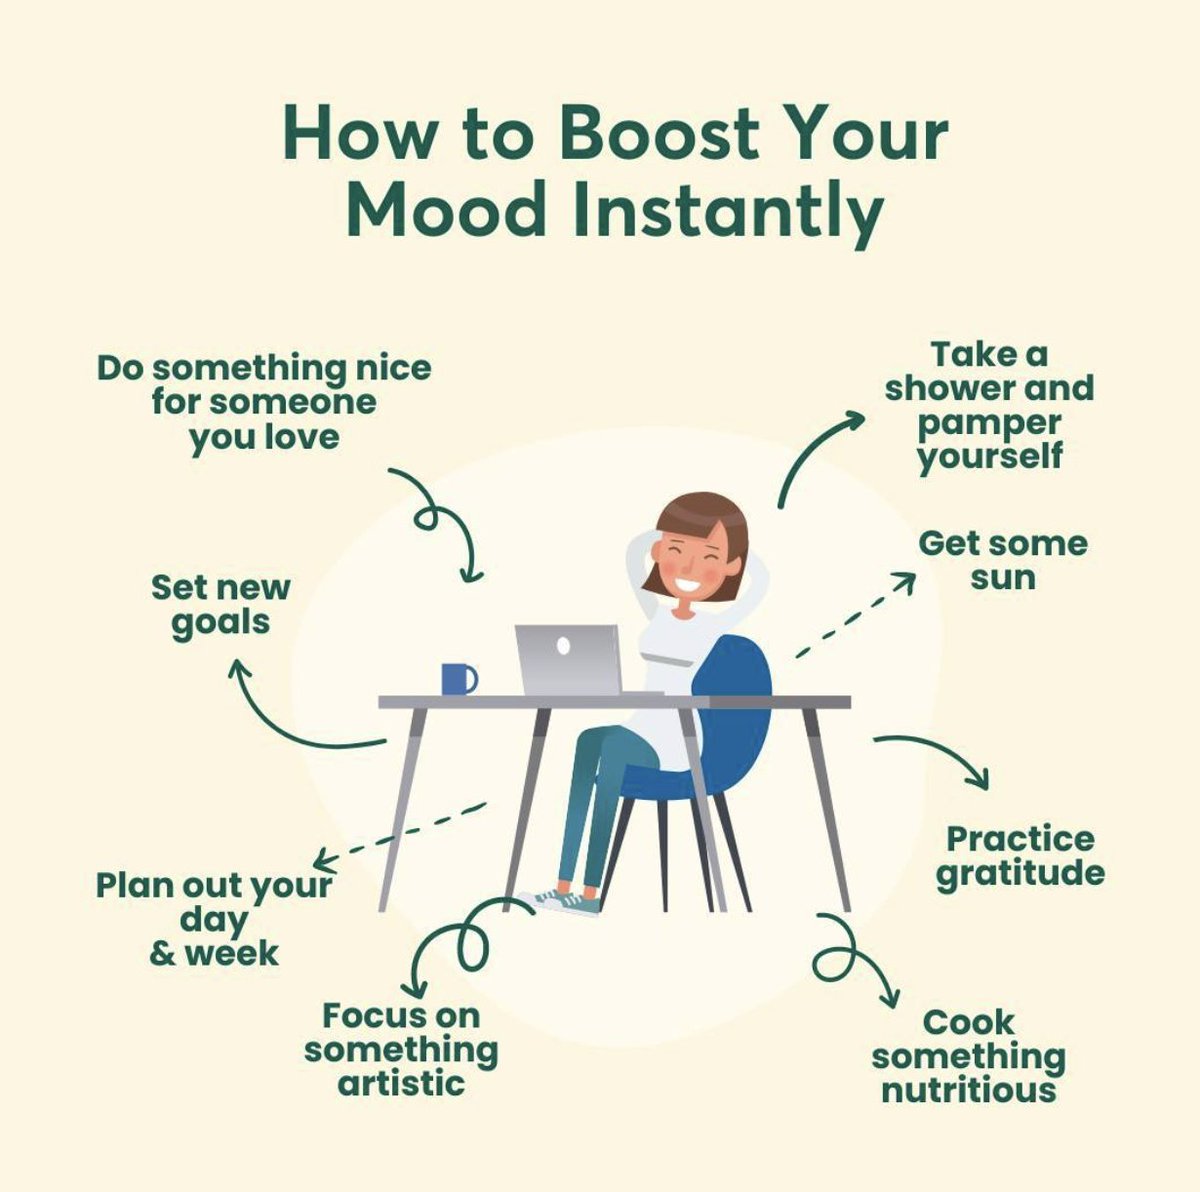 Have you tried any of these instant mood boosters? 👇